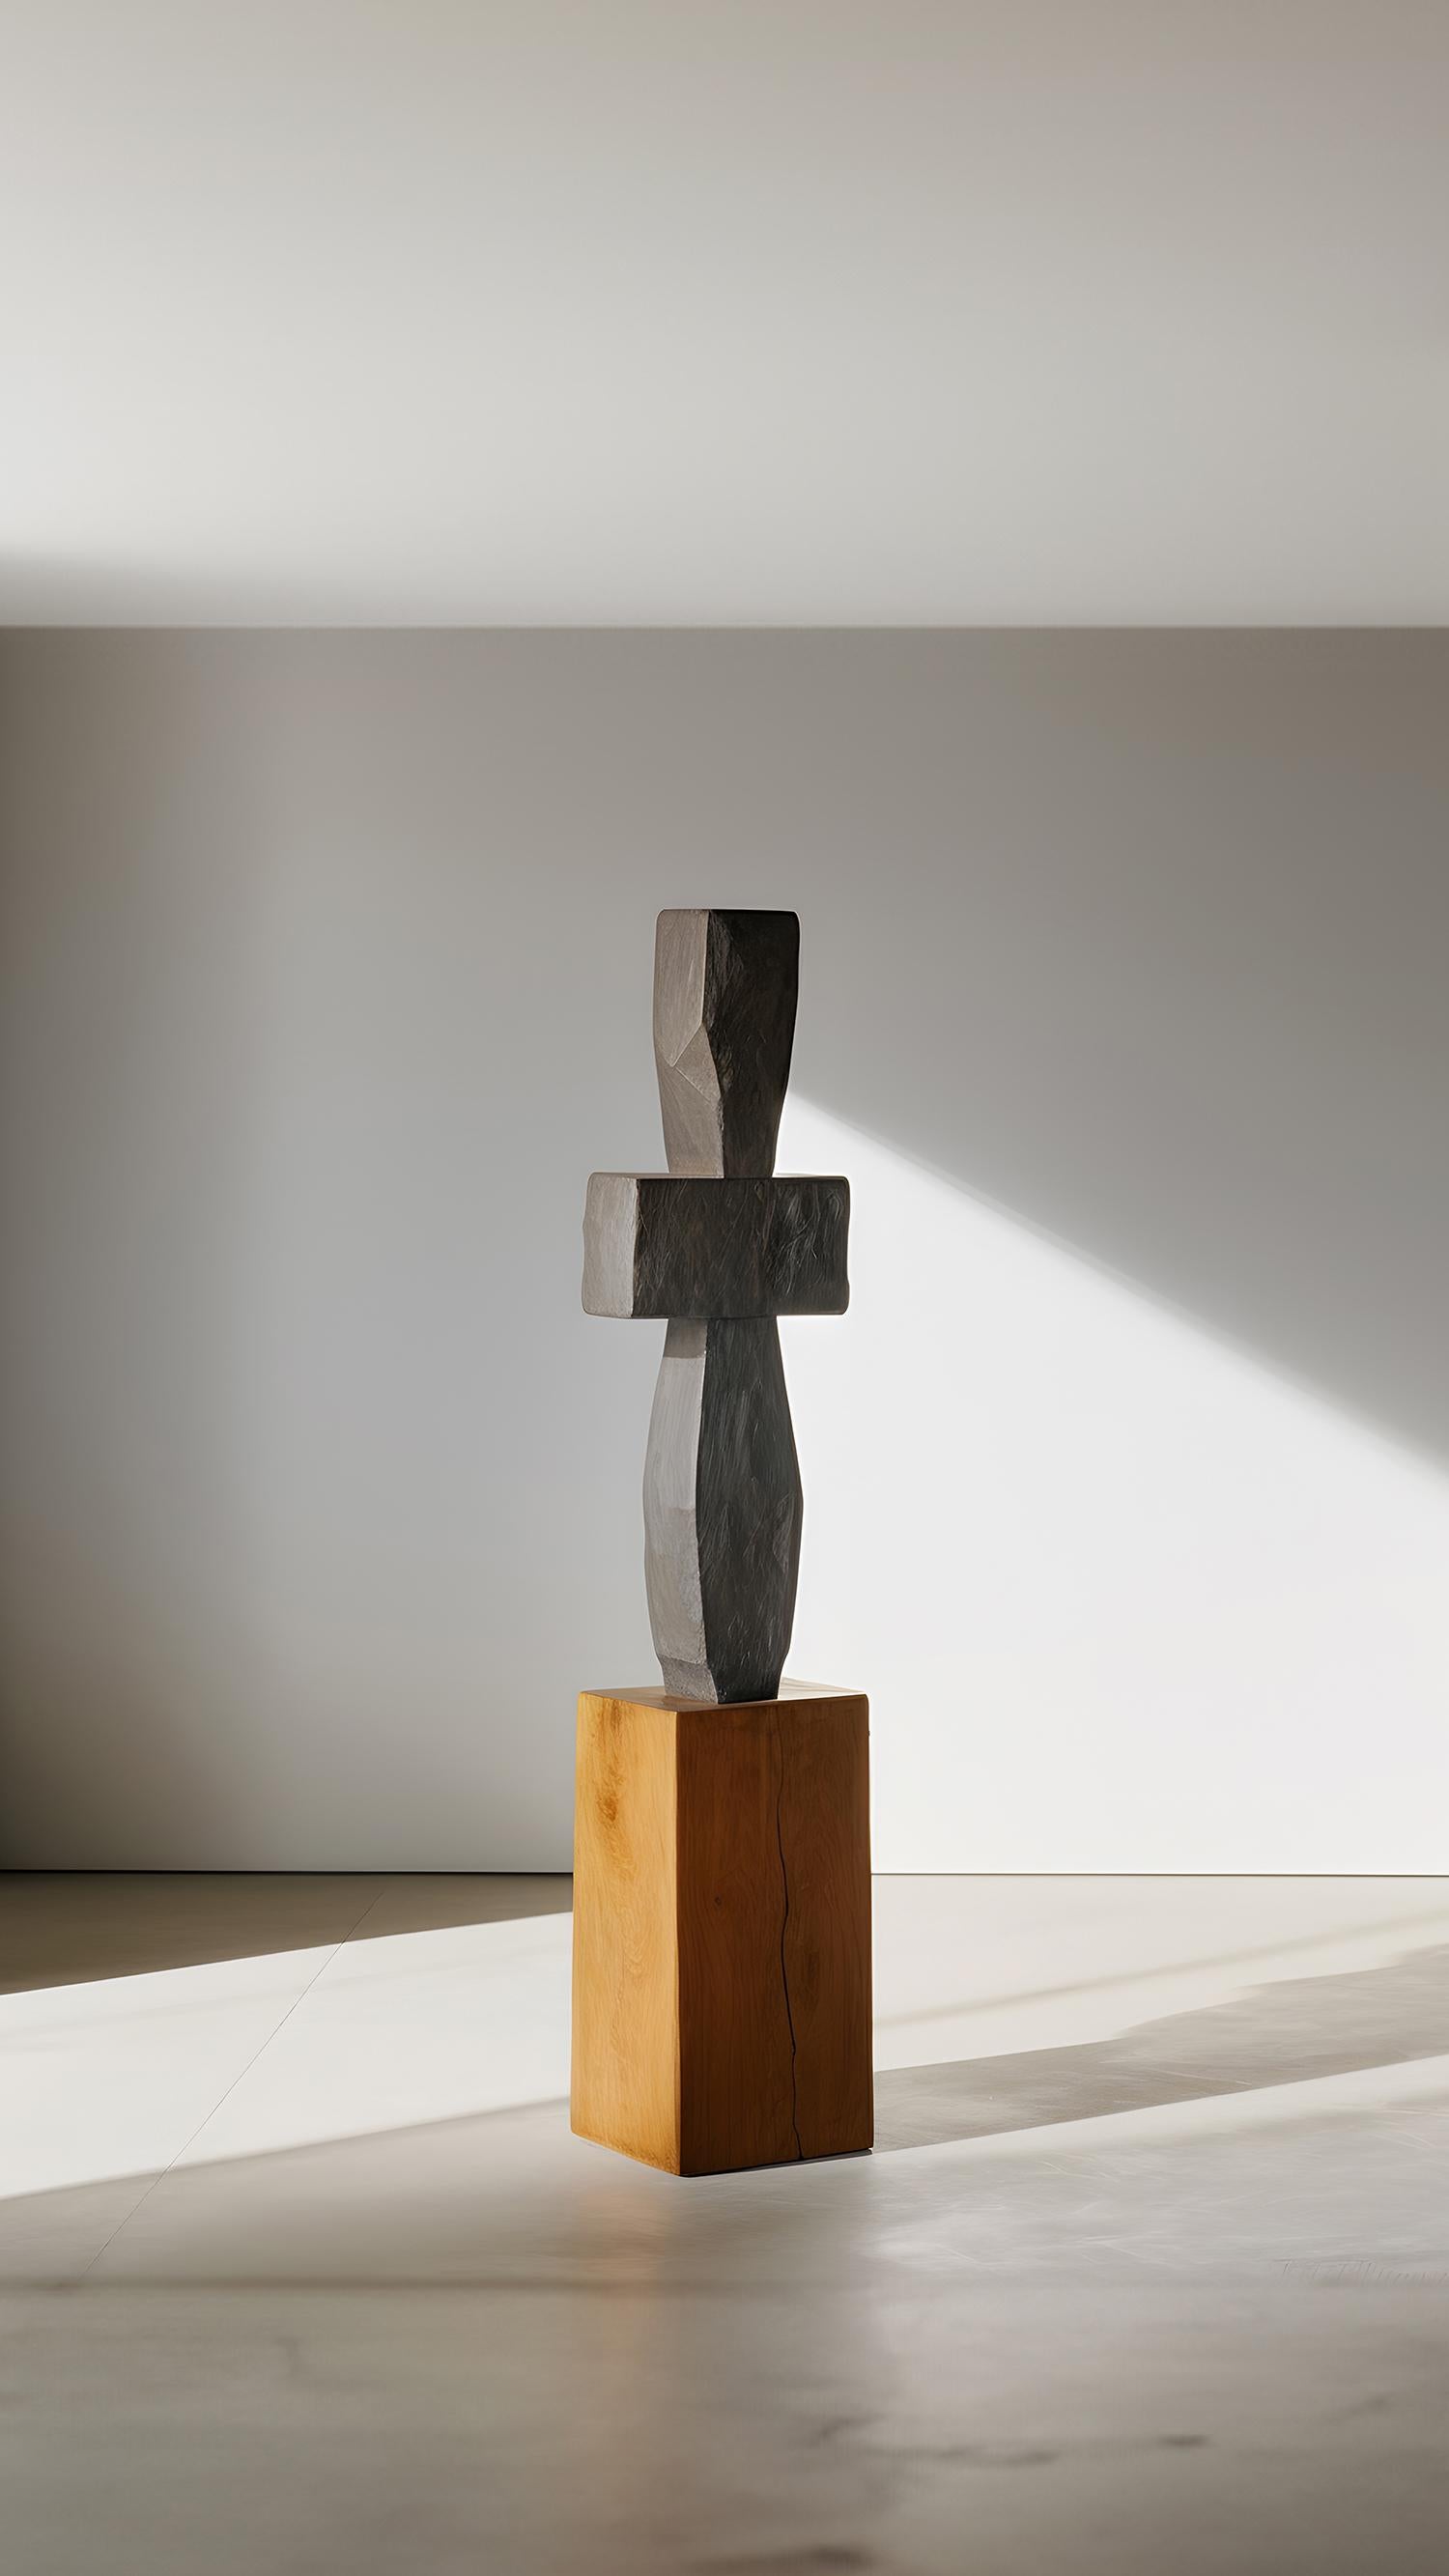 Abstract Modernist Free Form Wooden Sculpture in the style of Jean Arp, Unseen Force 11 by Joel Escalona



This monolithic sculpture, designed by the talented Artist Joel Escalona, is a towering example of beauty in craftsmanship. Hand and digital